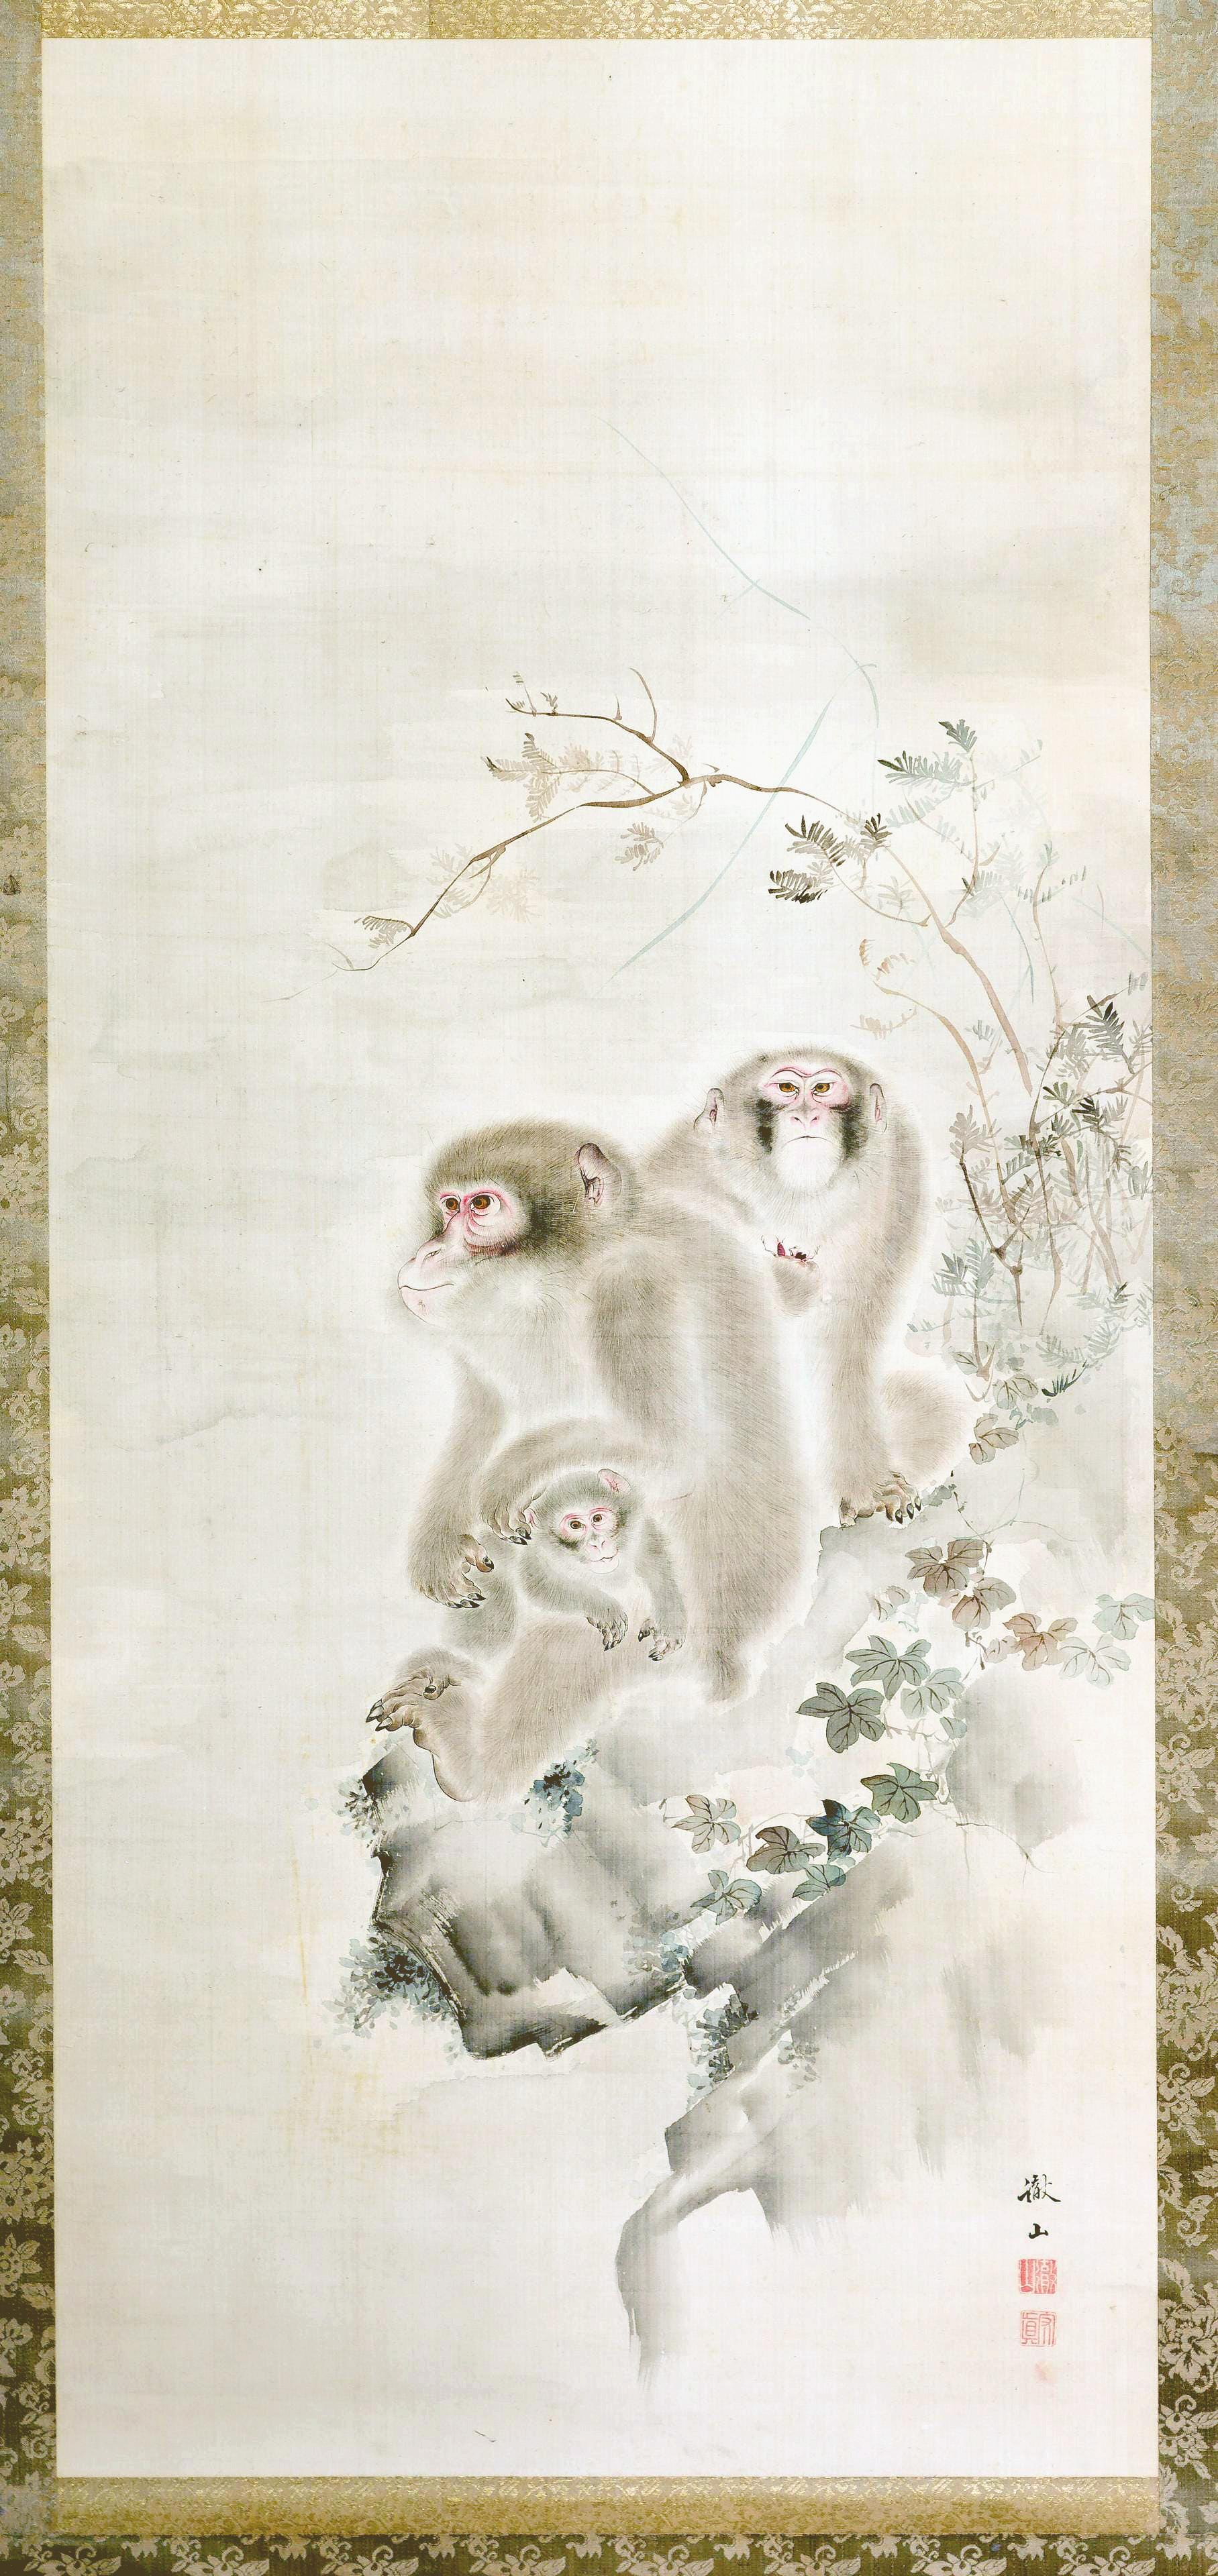 A Japanese mounted vertical hanging scroll painting by Mori Tetsuzan (Japanese, 1775-1841) circa 19th century Edo period. The watercolor and ink on silk painting depicts a family of three moneys perched on a rock in a floral landscape. The style is